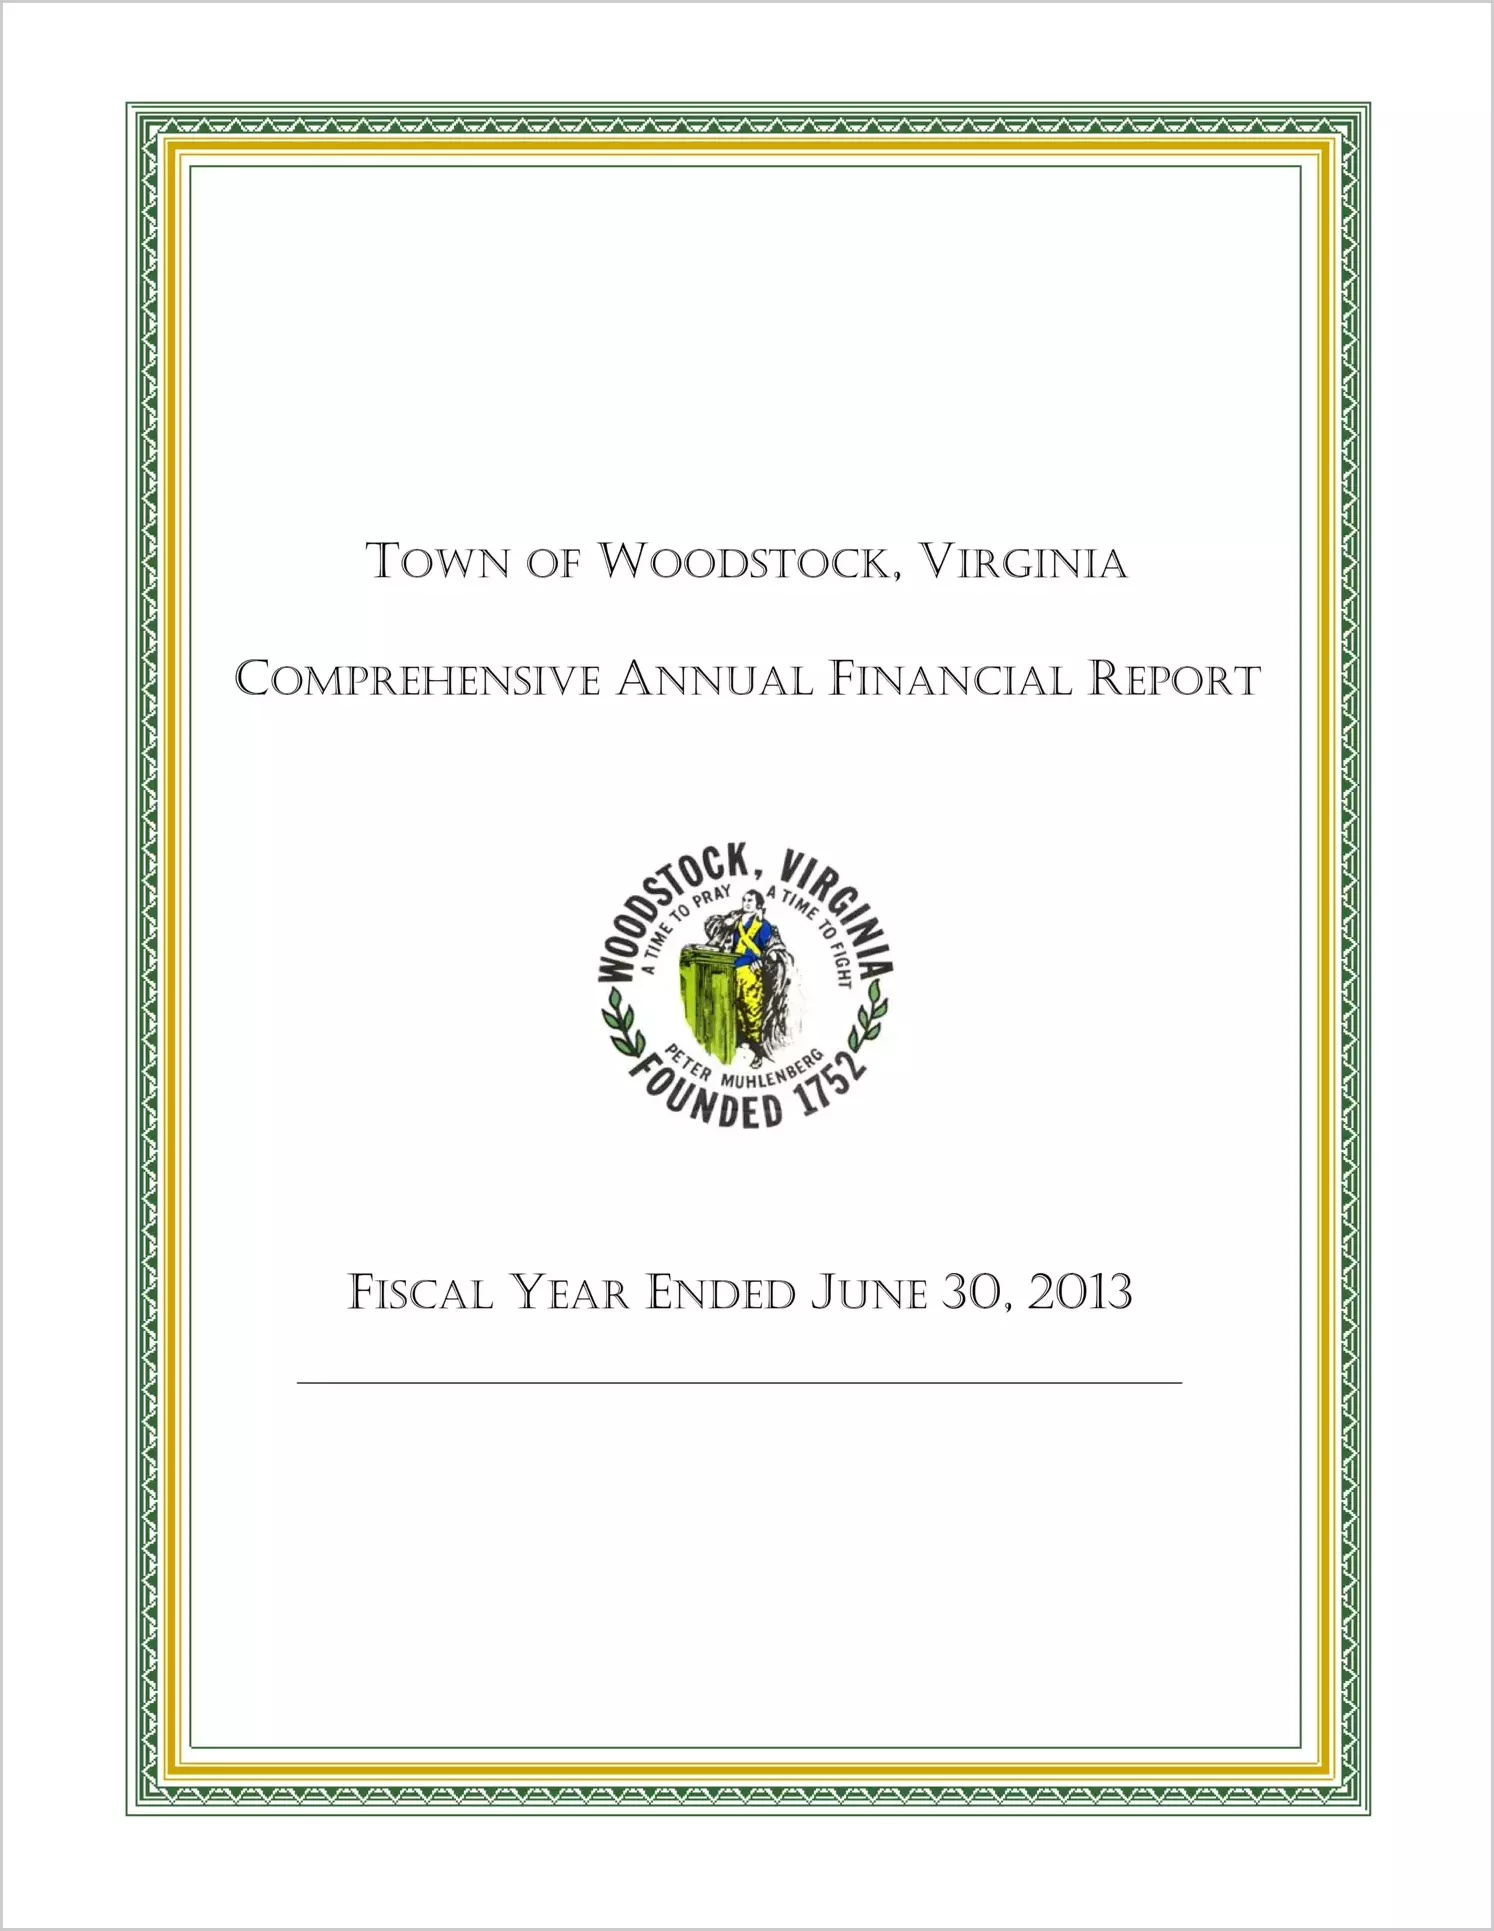 2013 Annual Financial Report for Town of Woodstock